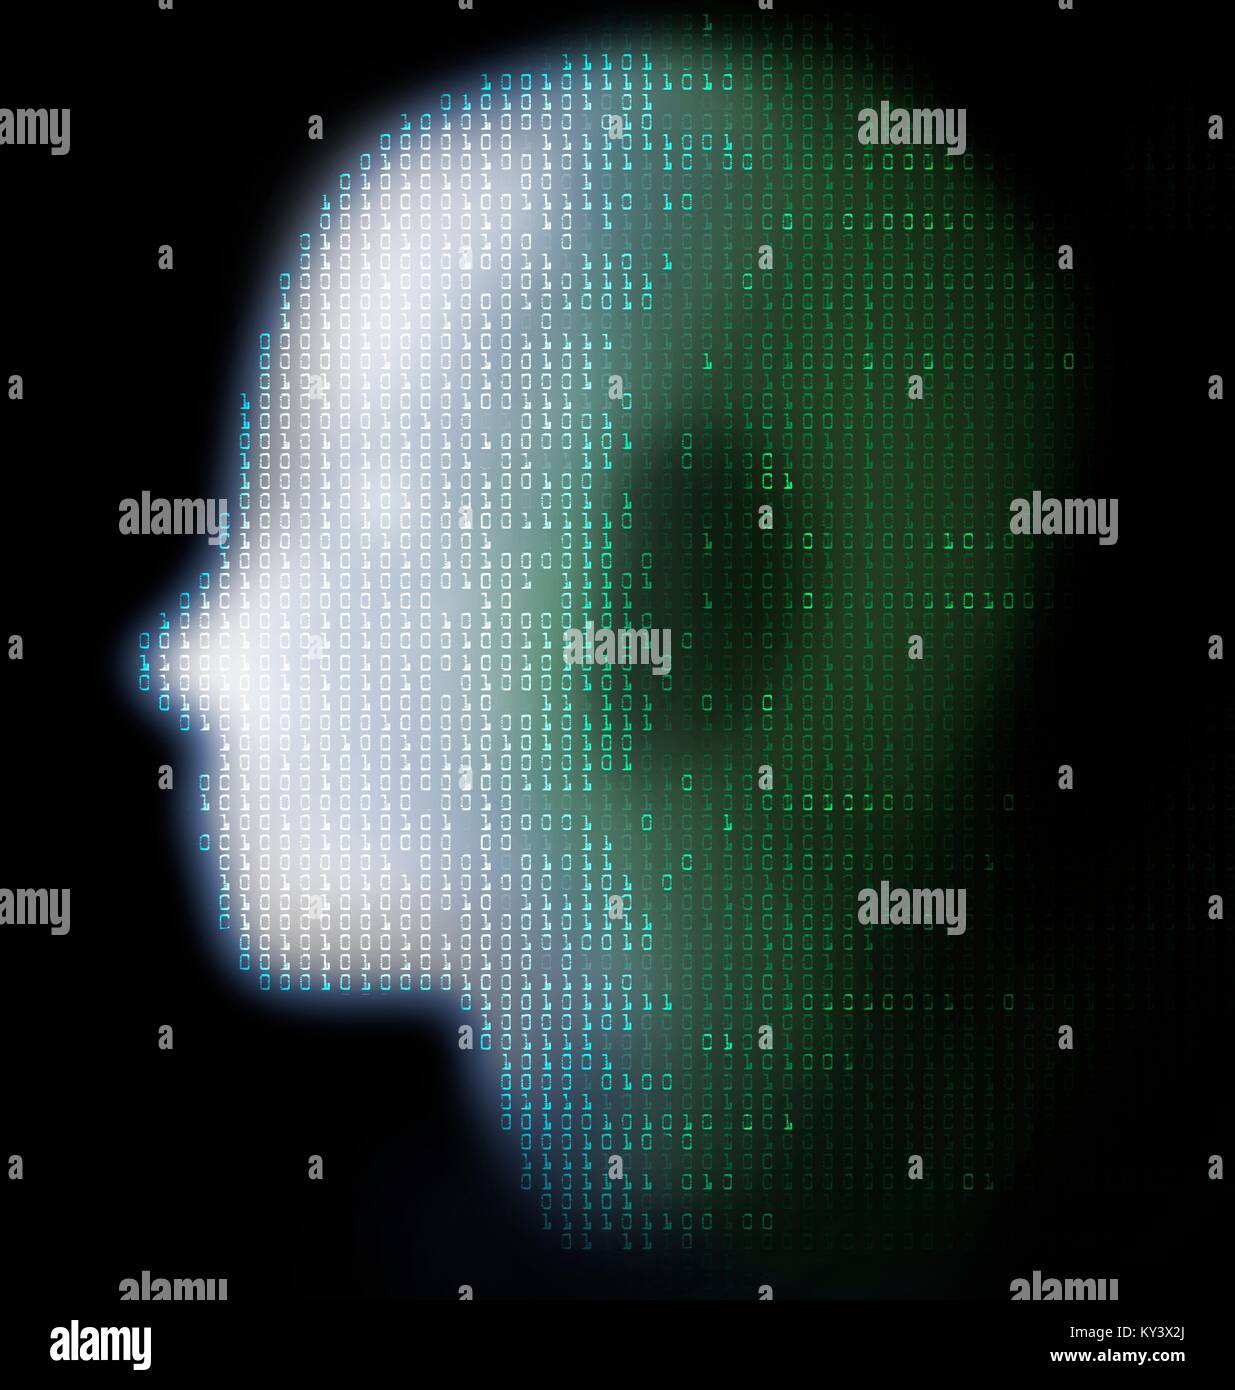 Artificial intelligence. Conceptual illustration of a human head overlaid with binary digits, representing artificial intelligence, the simulation of human intelligence by a machine. Binary numbers, which contain only 1 and 0, form the language of computers. Artificial intelligence is usually taken to mean a computer or machine that can think and learn independently of its original program. Stock Photo